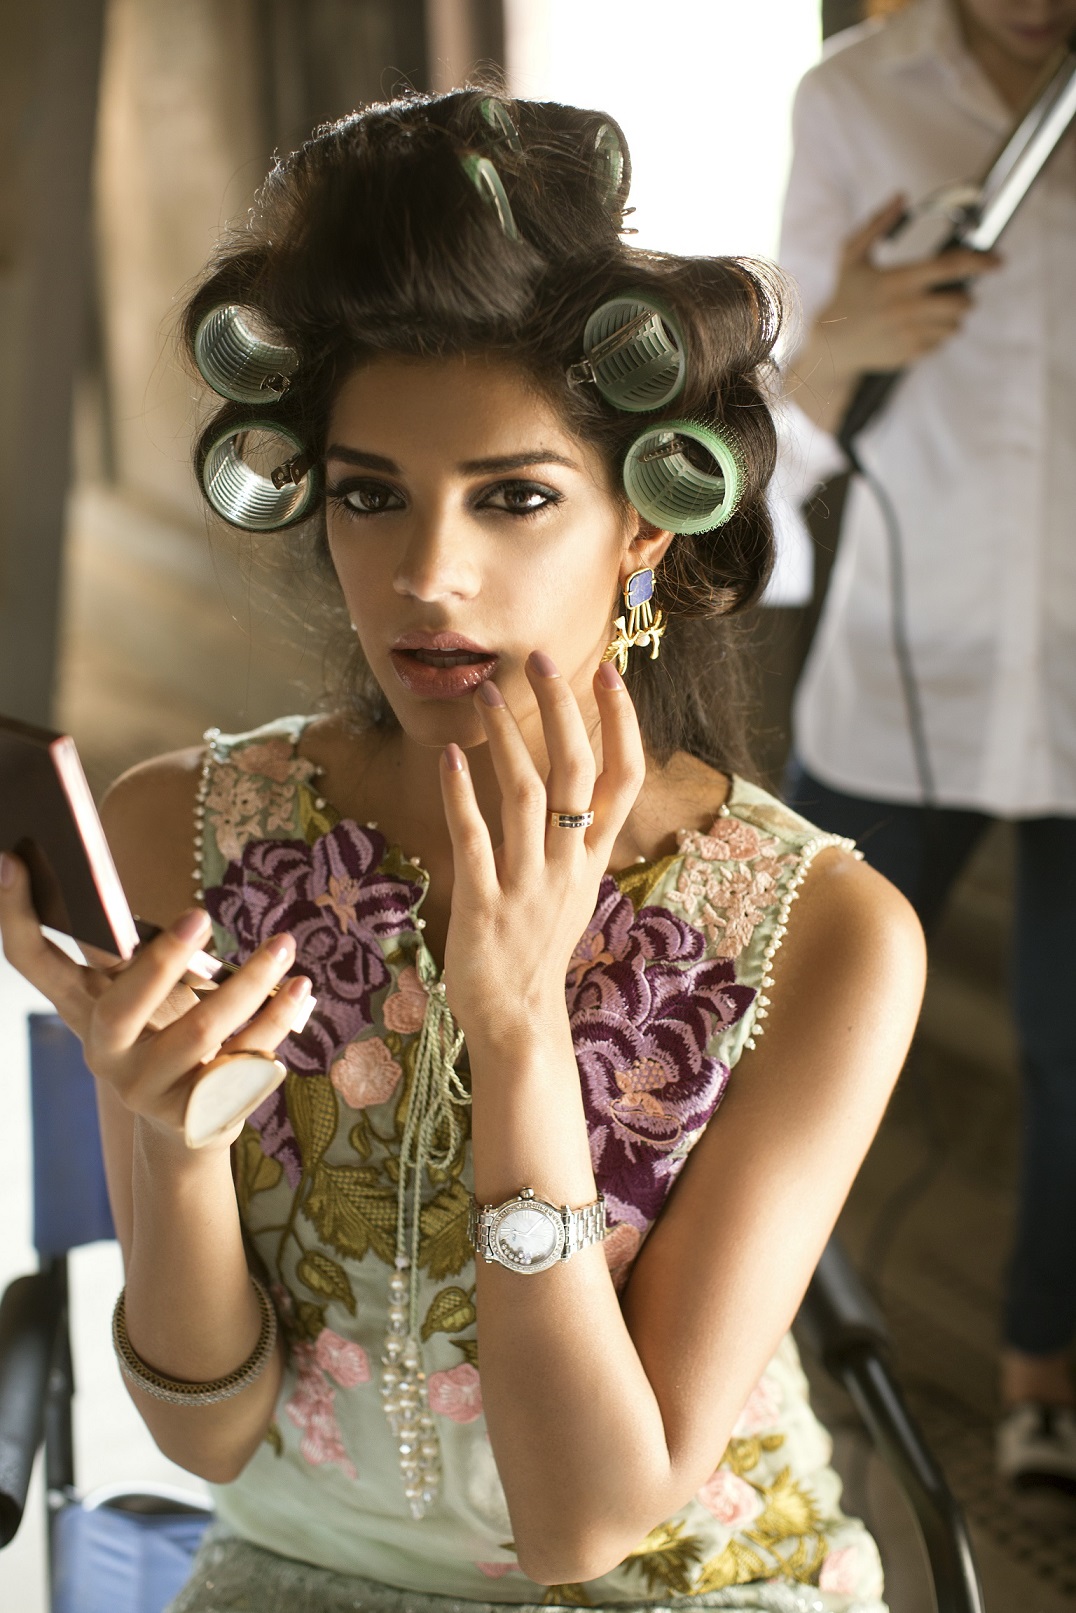 Crimson & Saira Shakira Collaborate to Launch Crimson Luxe featuring Sanam Saeed as the face of the campaign (1)